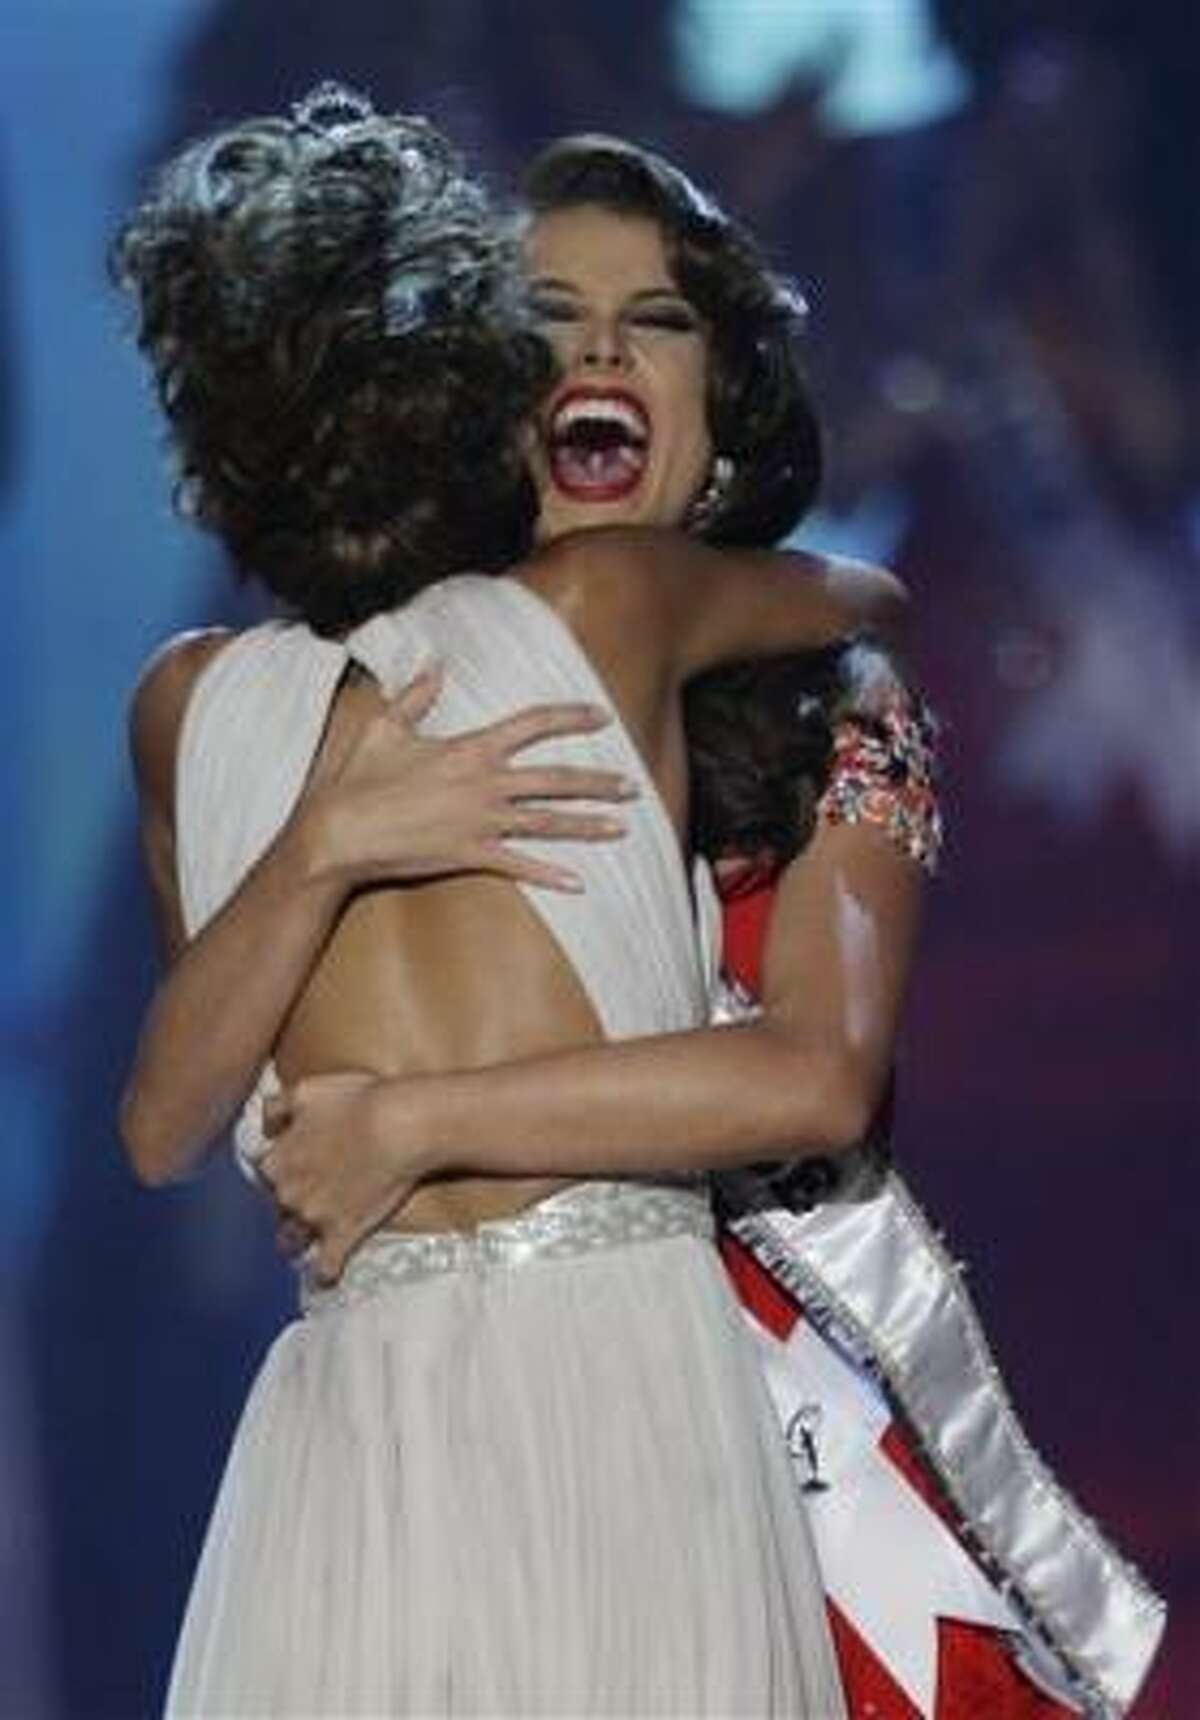 Miss Venezuela Stefania Fernandez, left, reacts as Miss Universe 2008 Dayana Mendoza, also of Venezuela, places the Miss Universe 2009 sash on her at the end of the Miss Universe beauty pageant in Nassau, Bahamas, Sunday, Aug. 23, 2009.